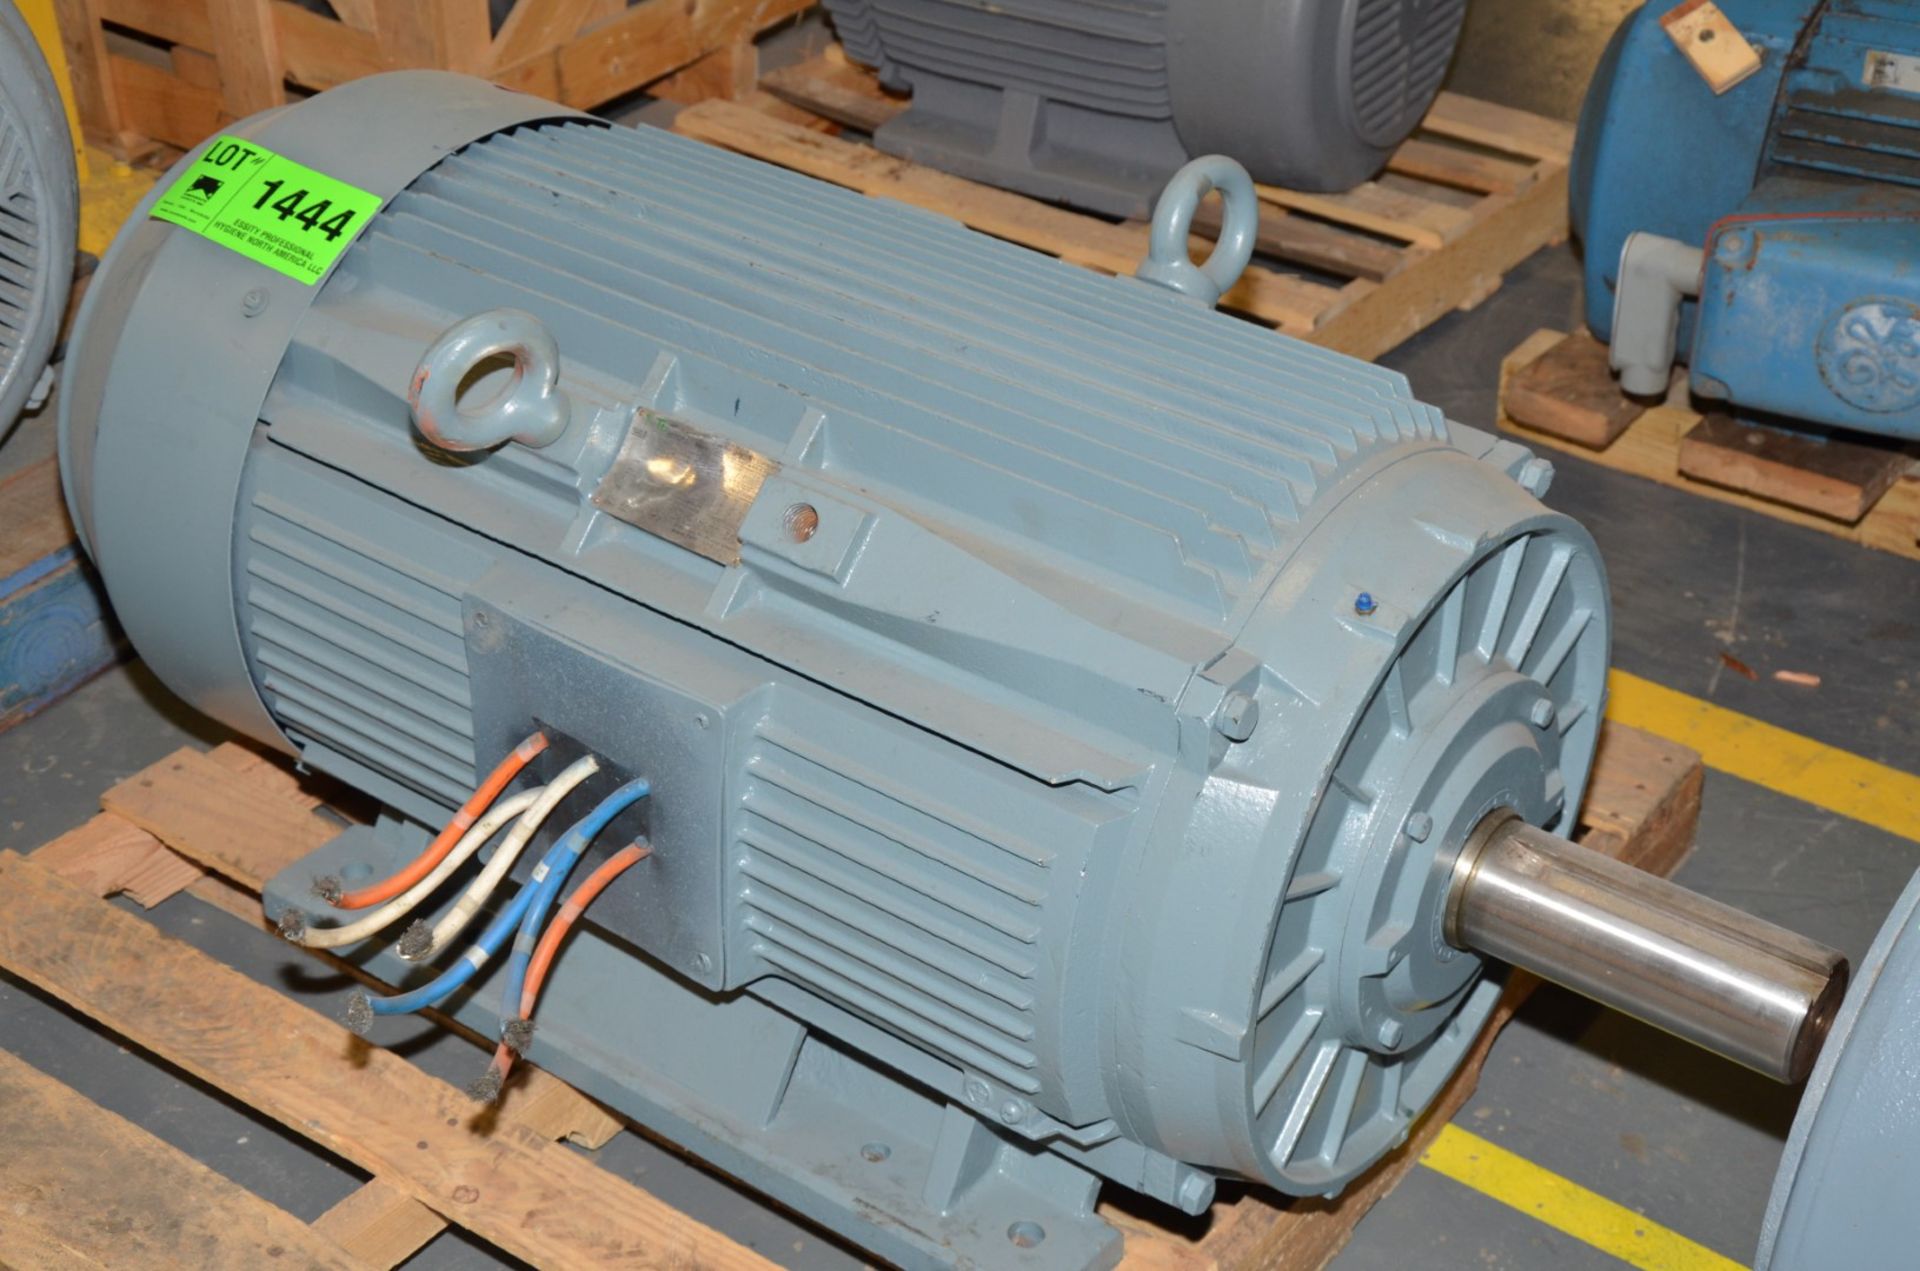 SIEMENS ELECTRIC MOTOR [RIGGING FEE FOR LOT #1444 - $50 USD PLUS APPLICABLE TAXES]